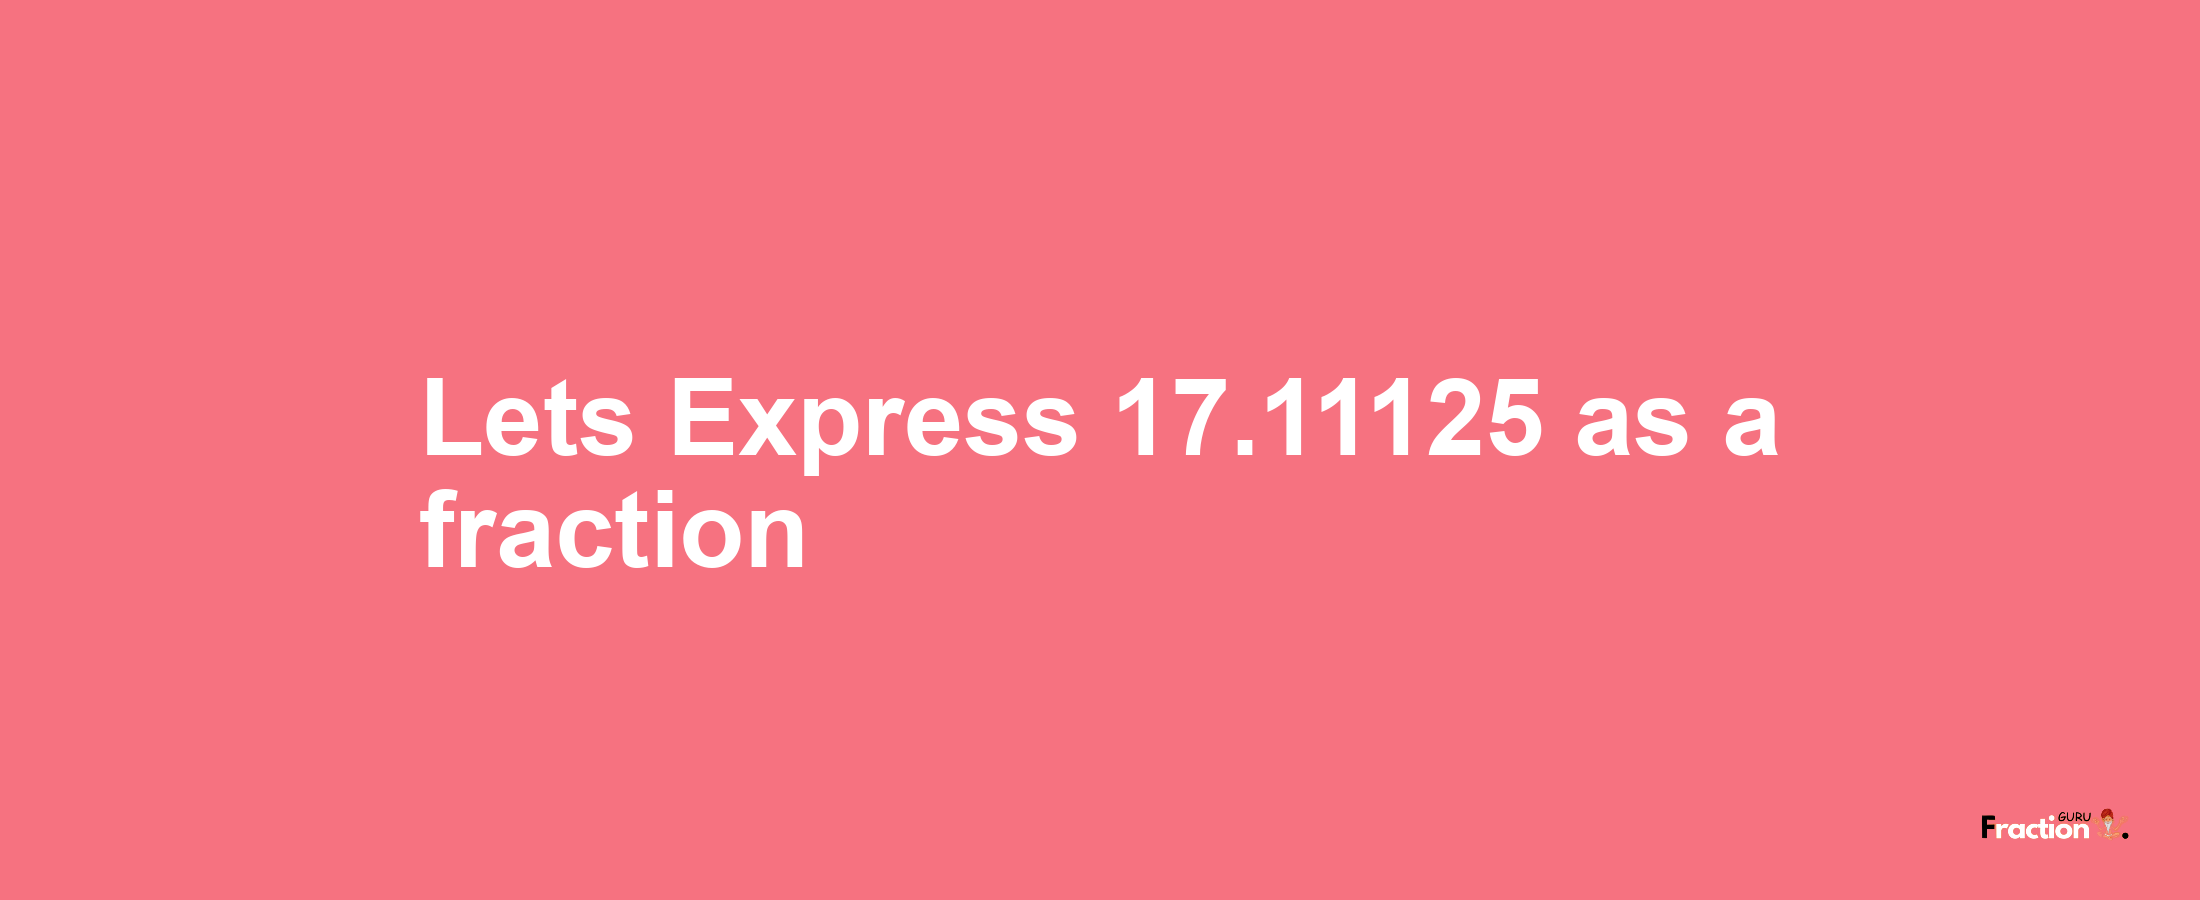 Lets Express 17.11125 as afraction